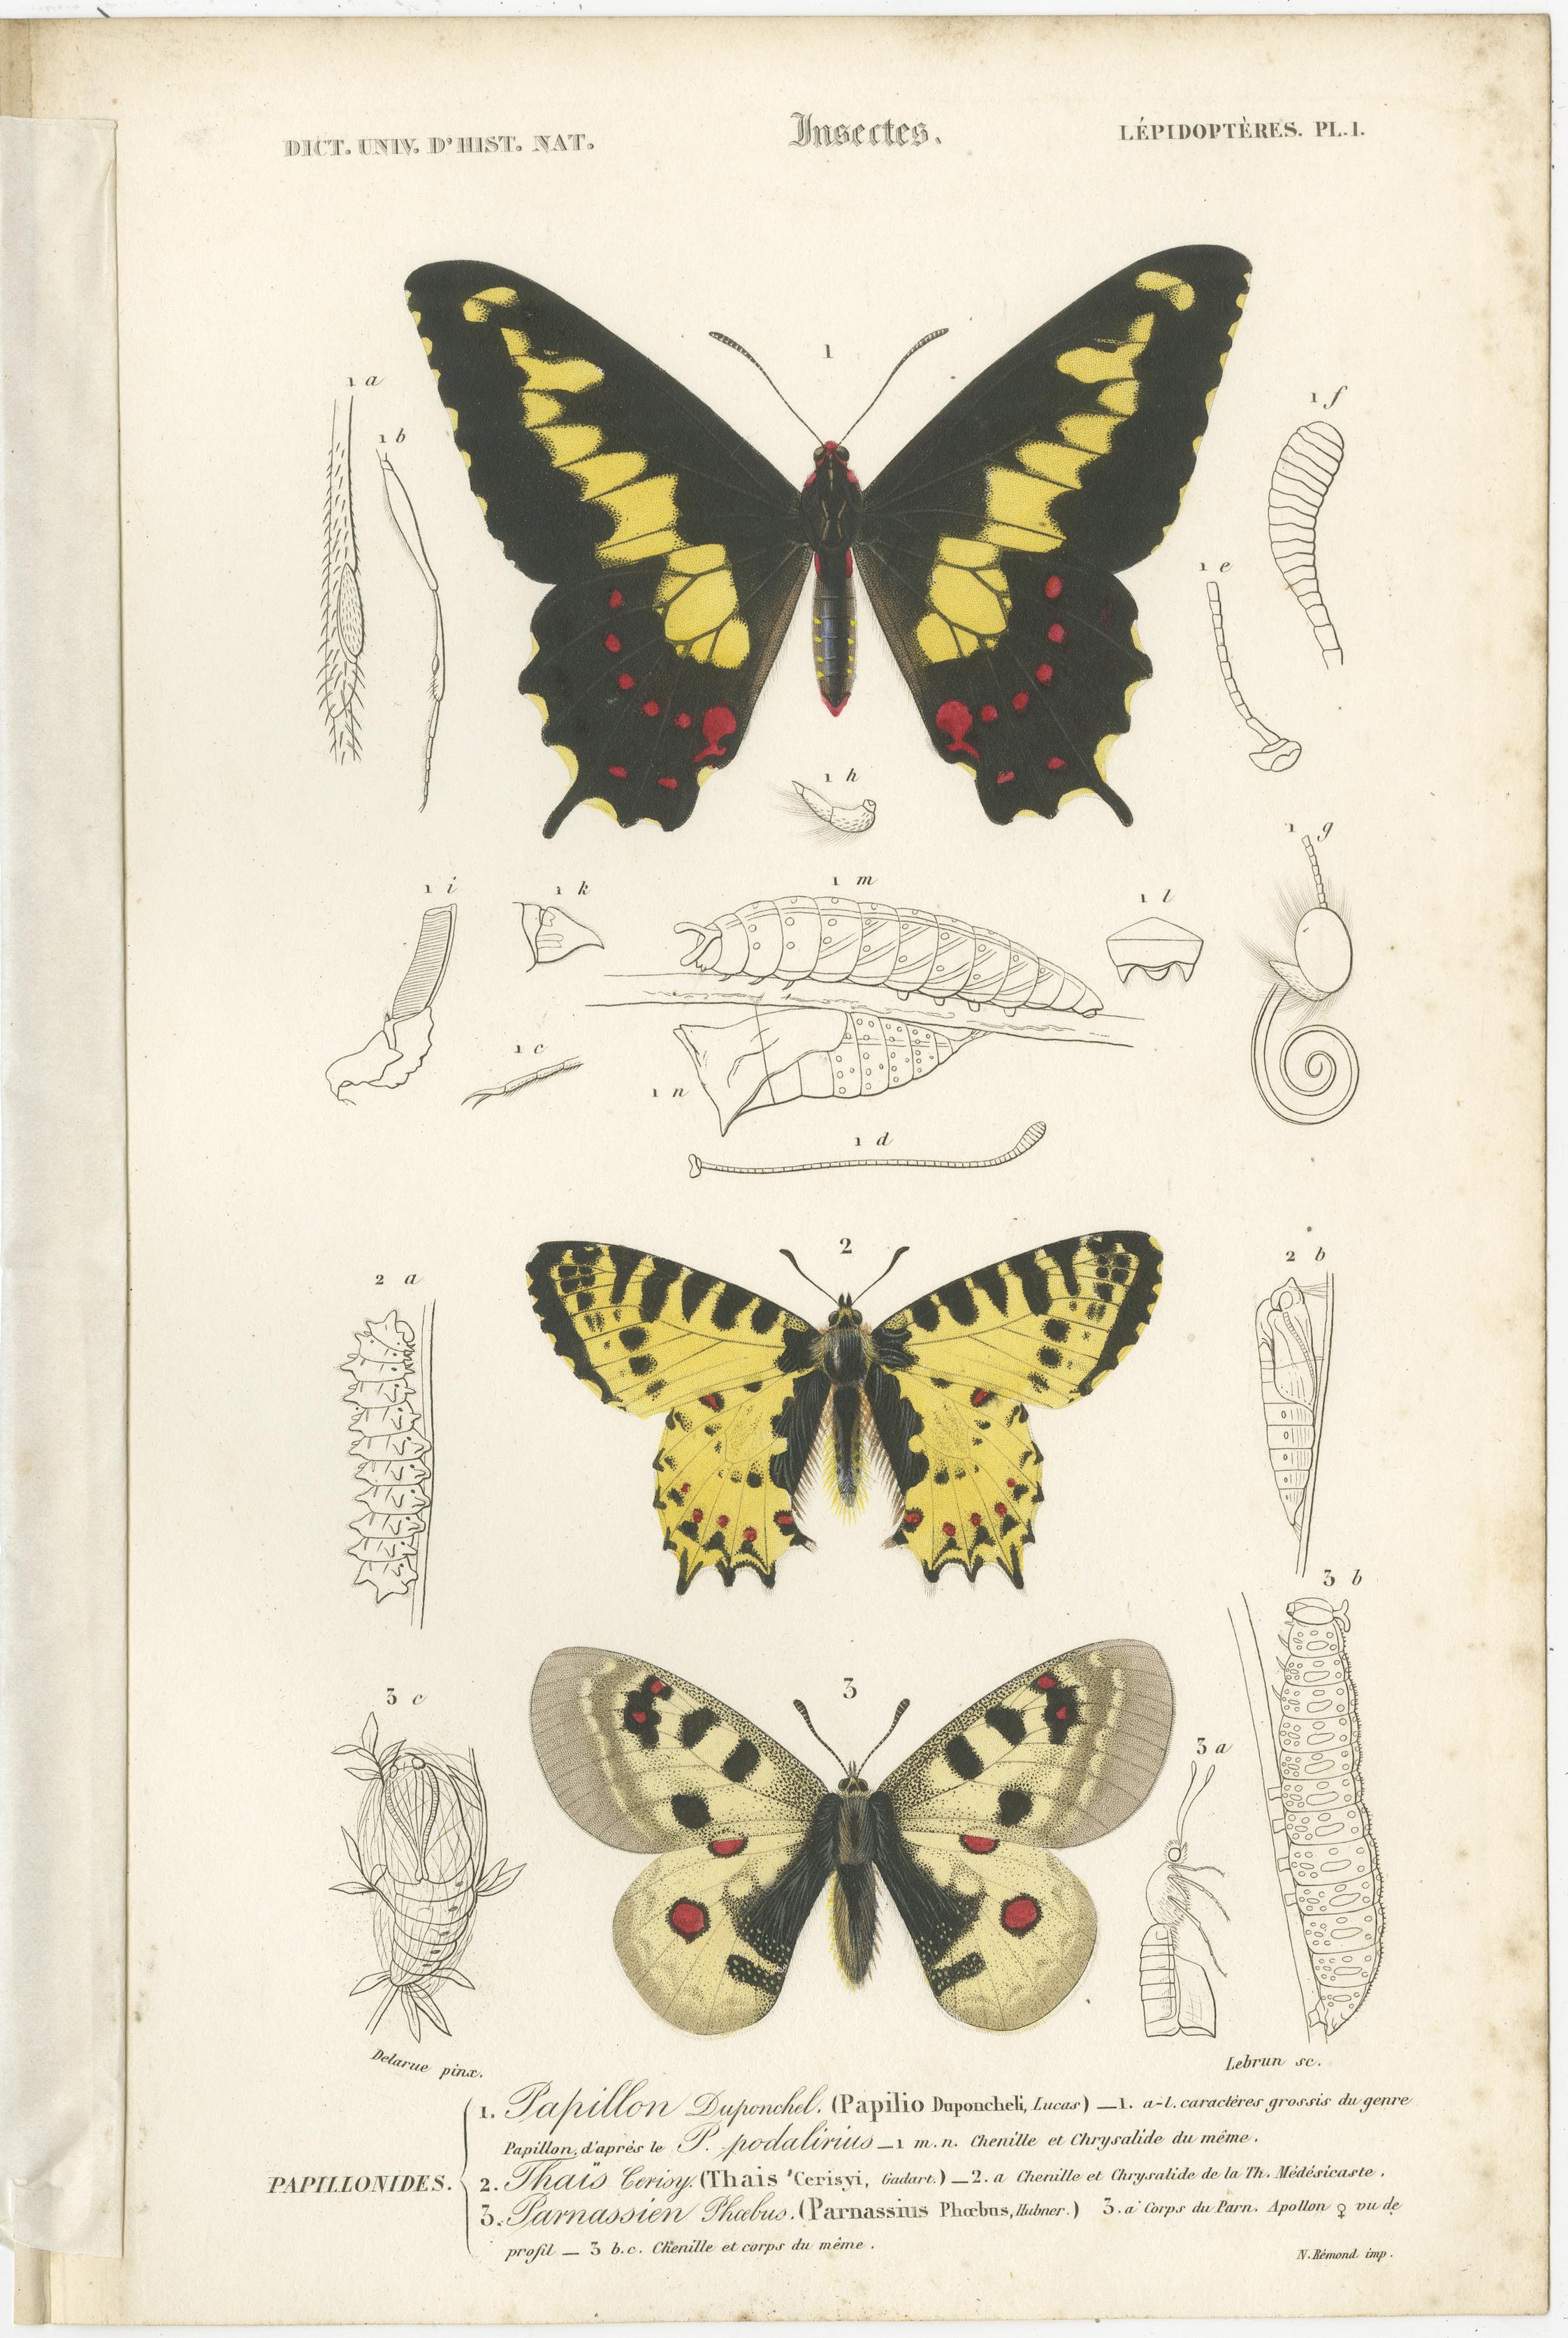 Set of 13 original antique prints of butterflies and moths. These prints originate from 'Dictionnaire universel d'Histoire Naturelle' by d'Orbigny. Published 1861. 

Charles Henry Dessalines d'Orbigny was a French botanist and geologist